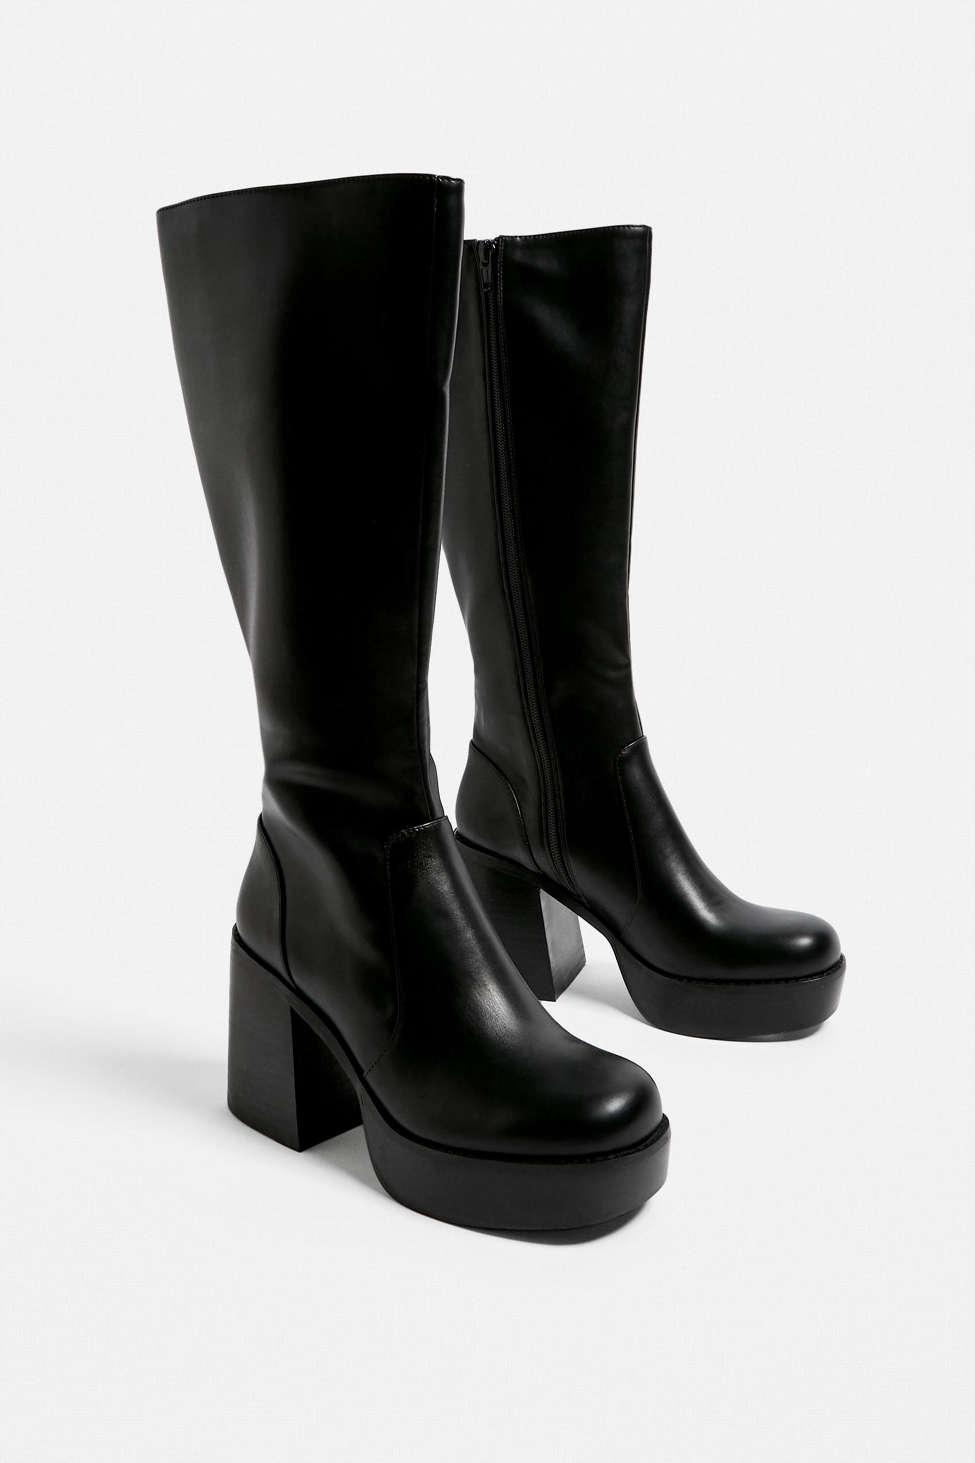 Urban Outfitters Uo Black Lea Knee-high Platform Boots | Lyst